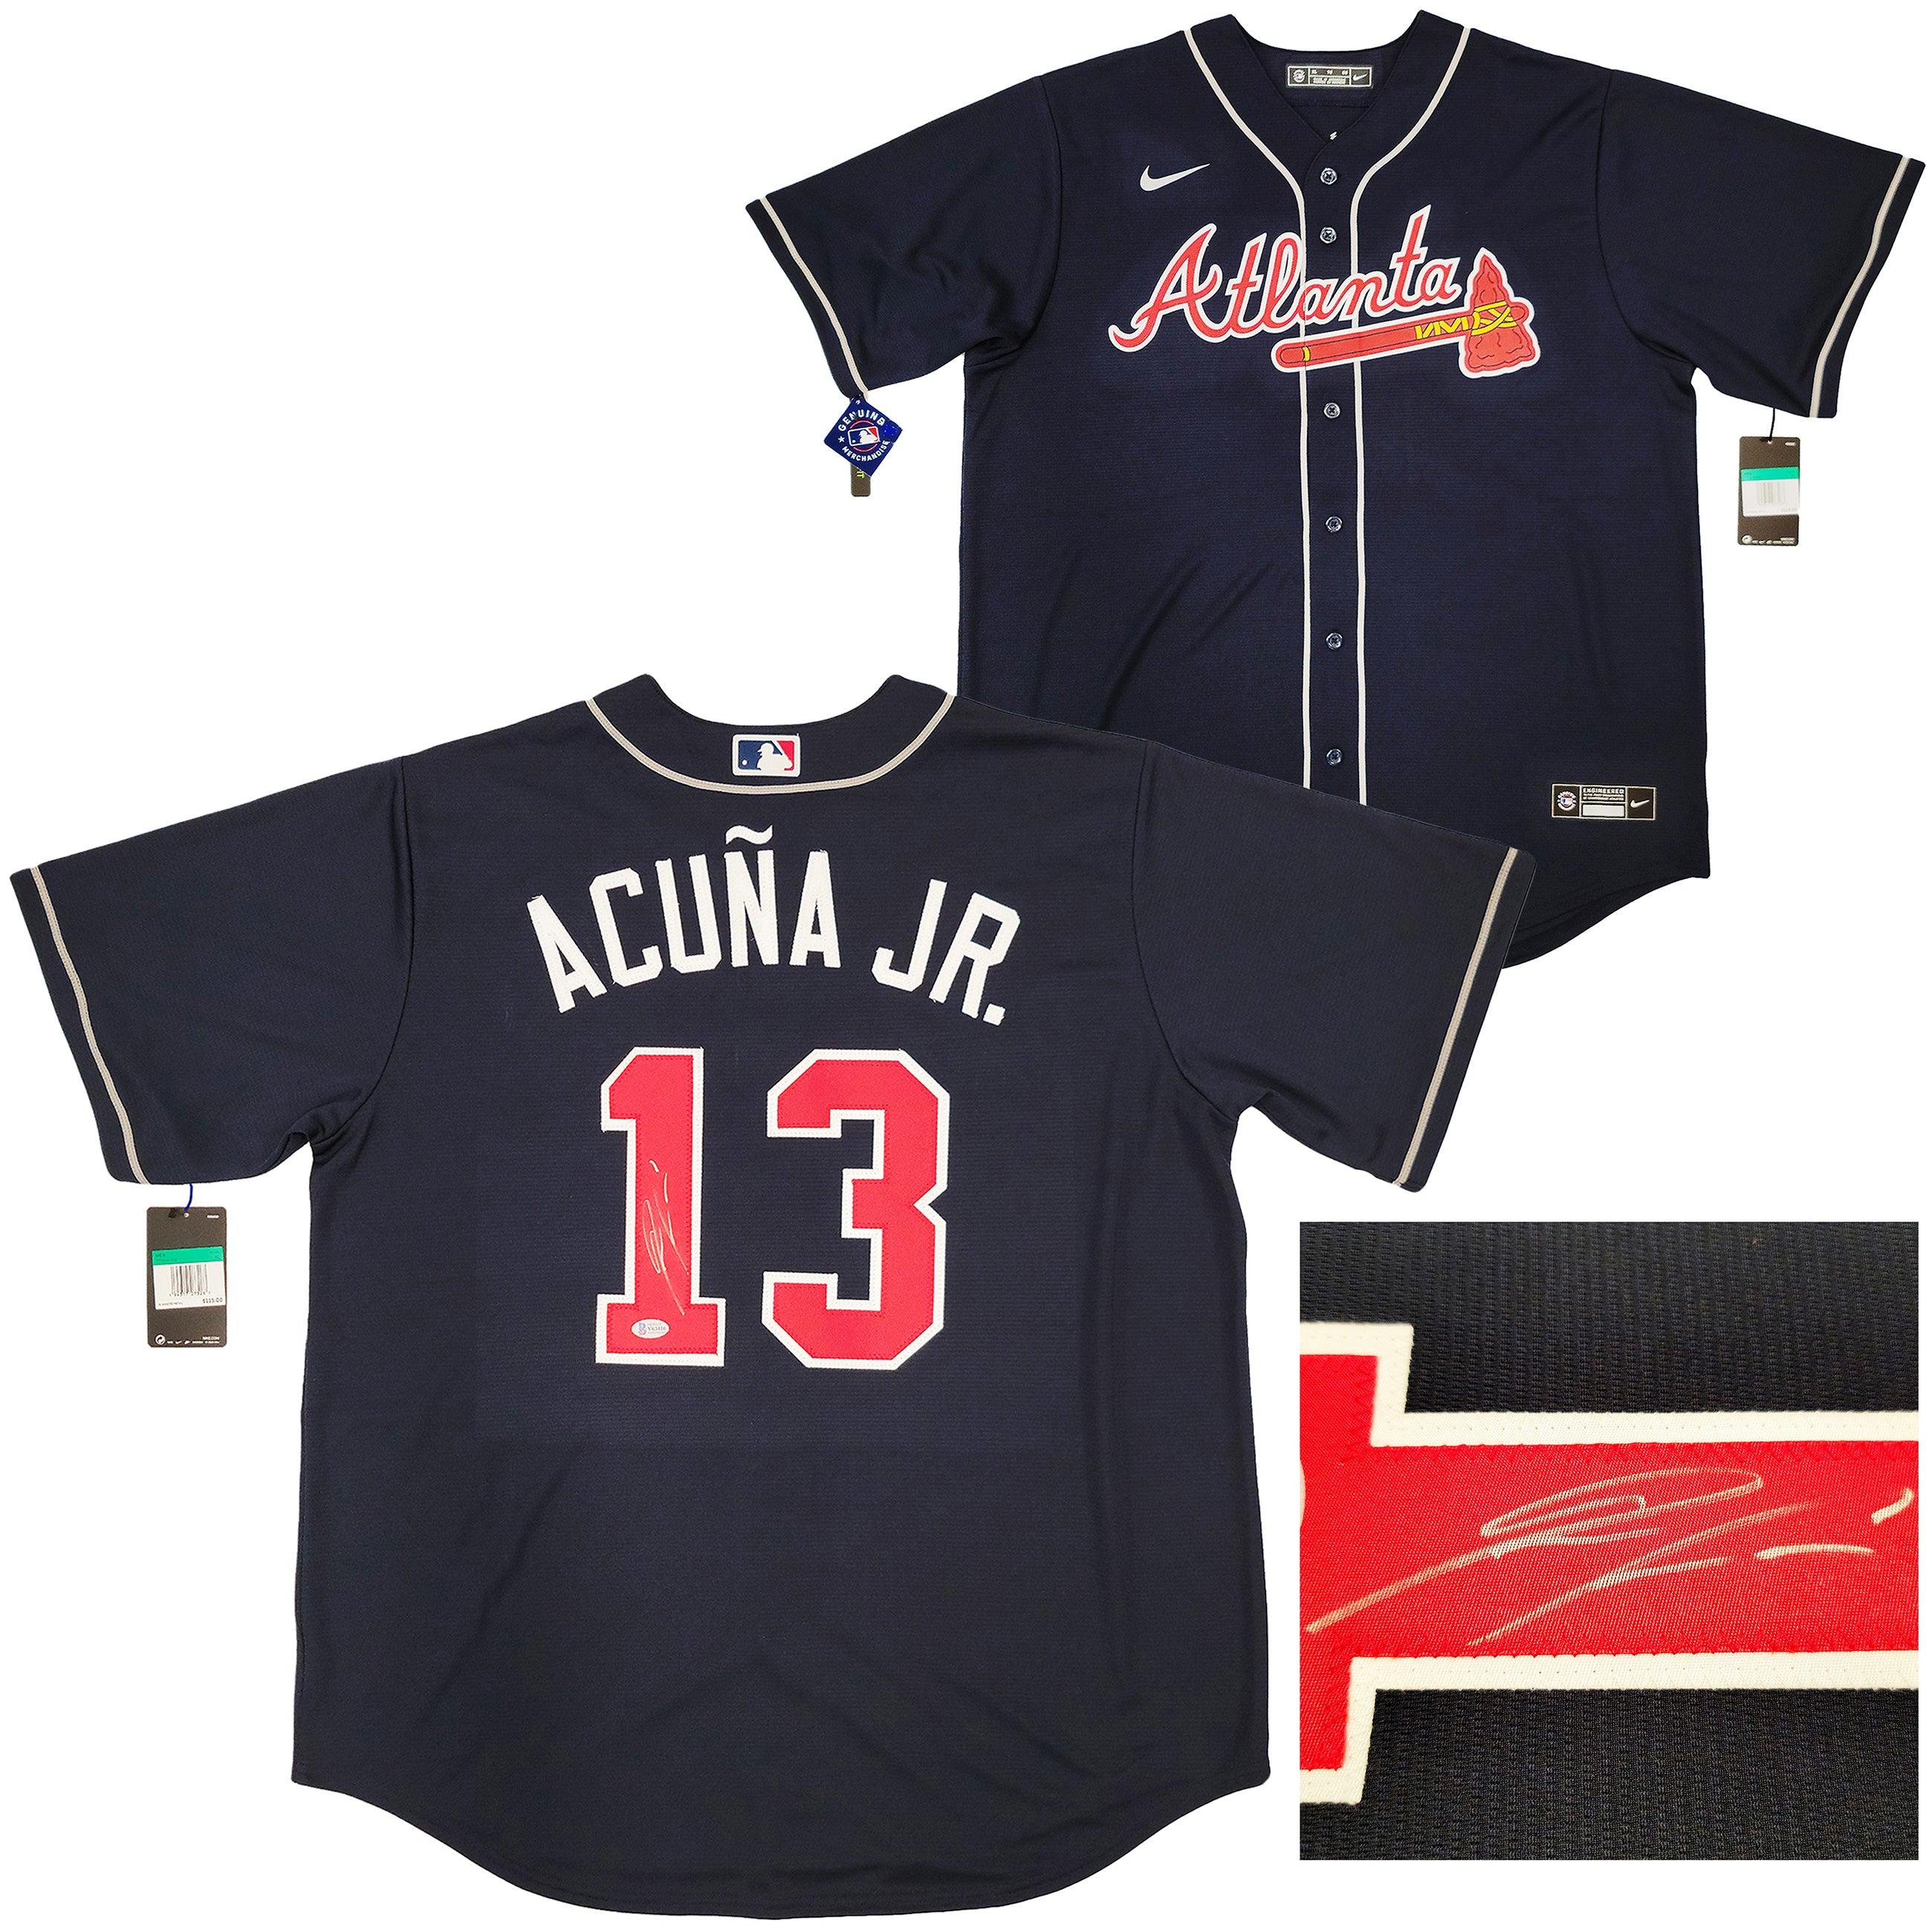 The Nike sliding mitt and batting glove of Ronald Acuna Jr. #13 of